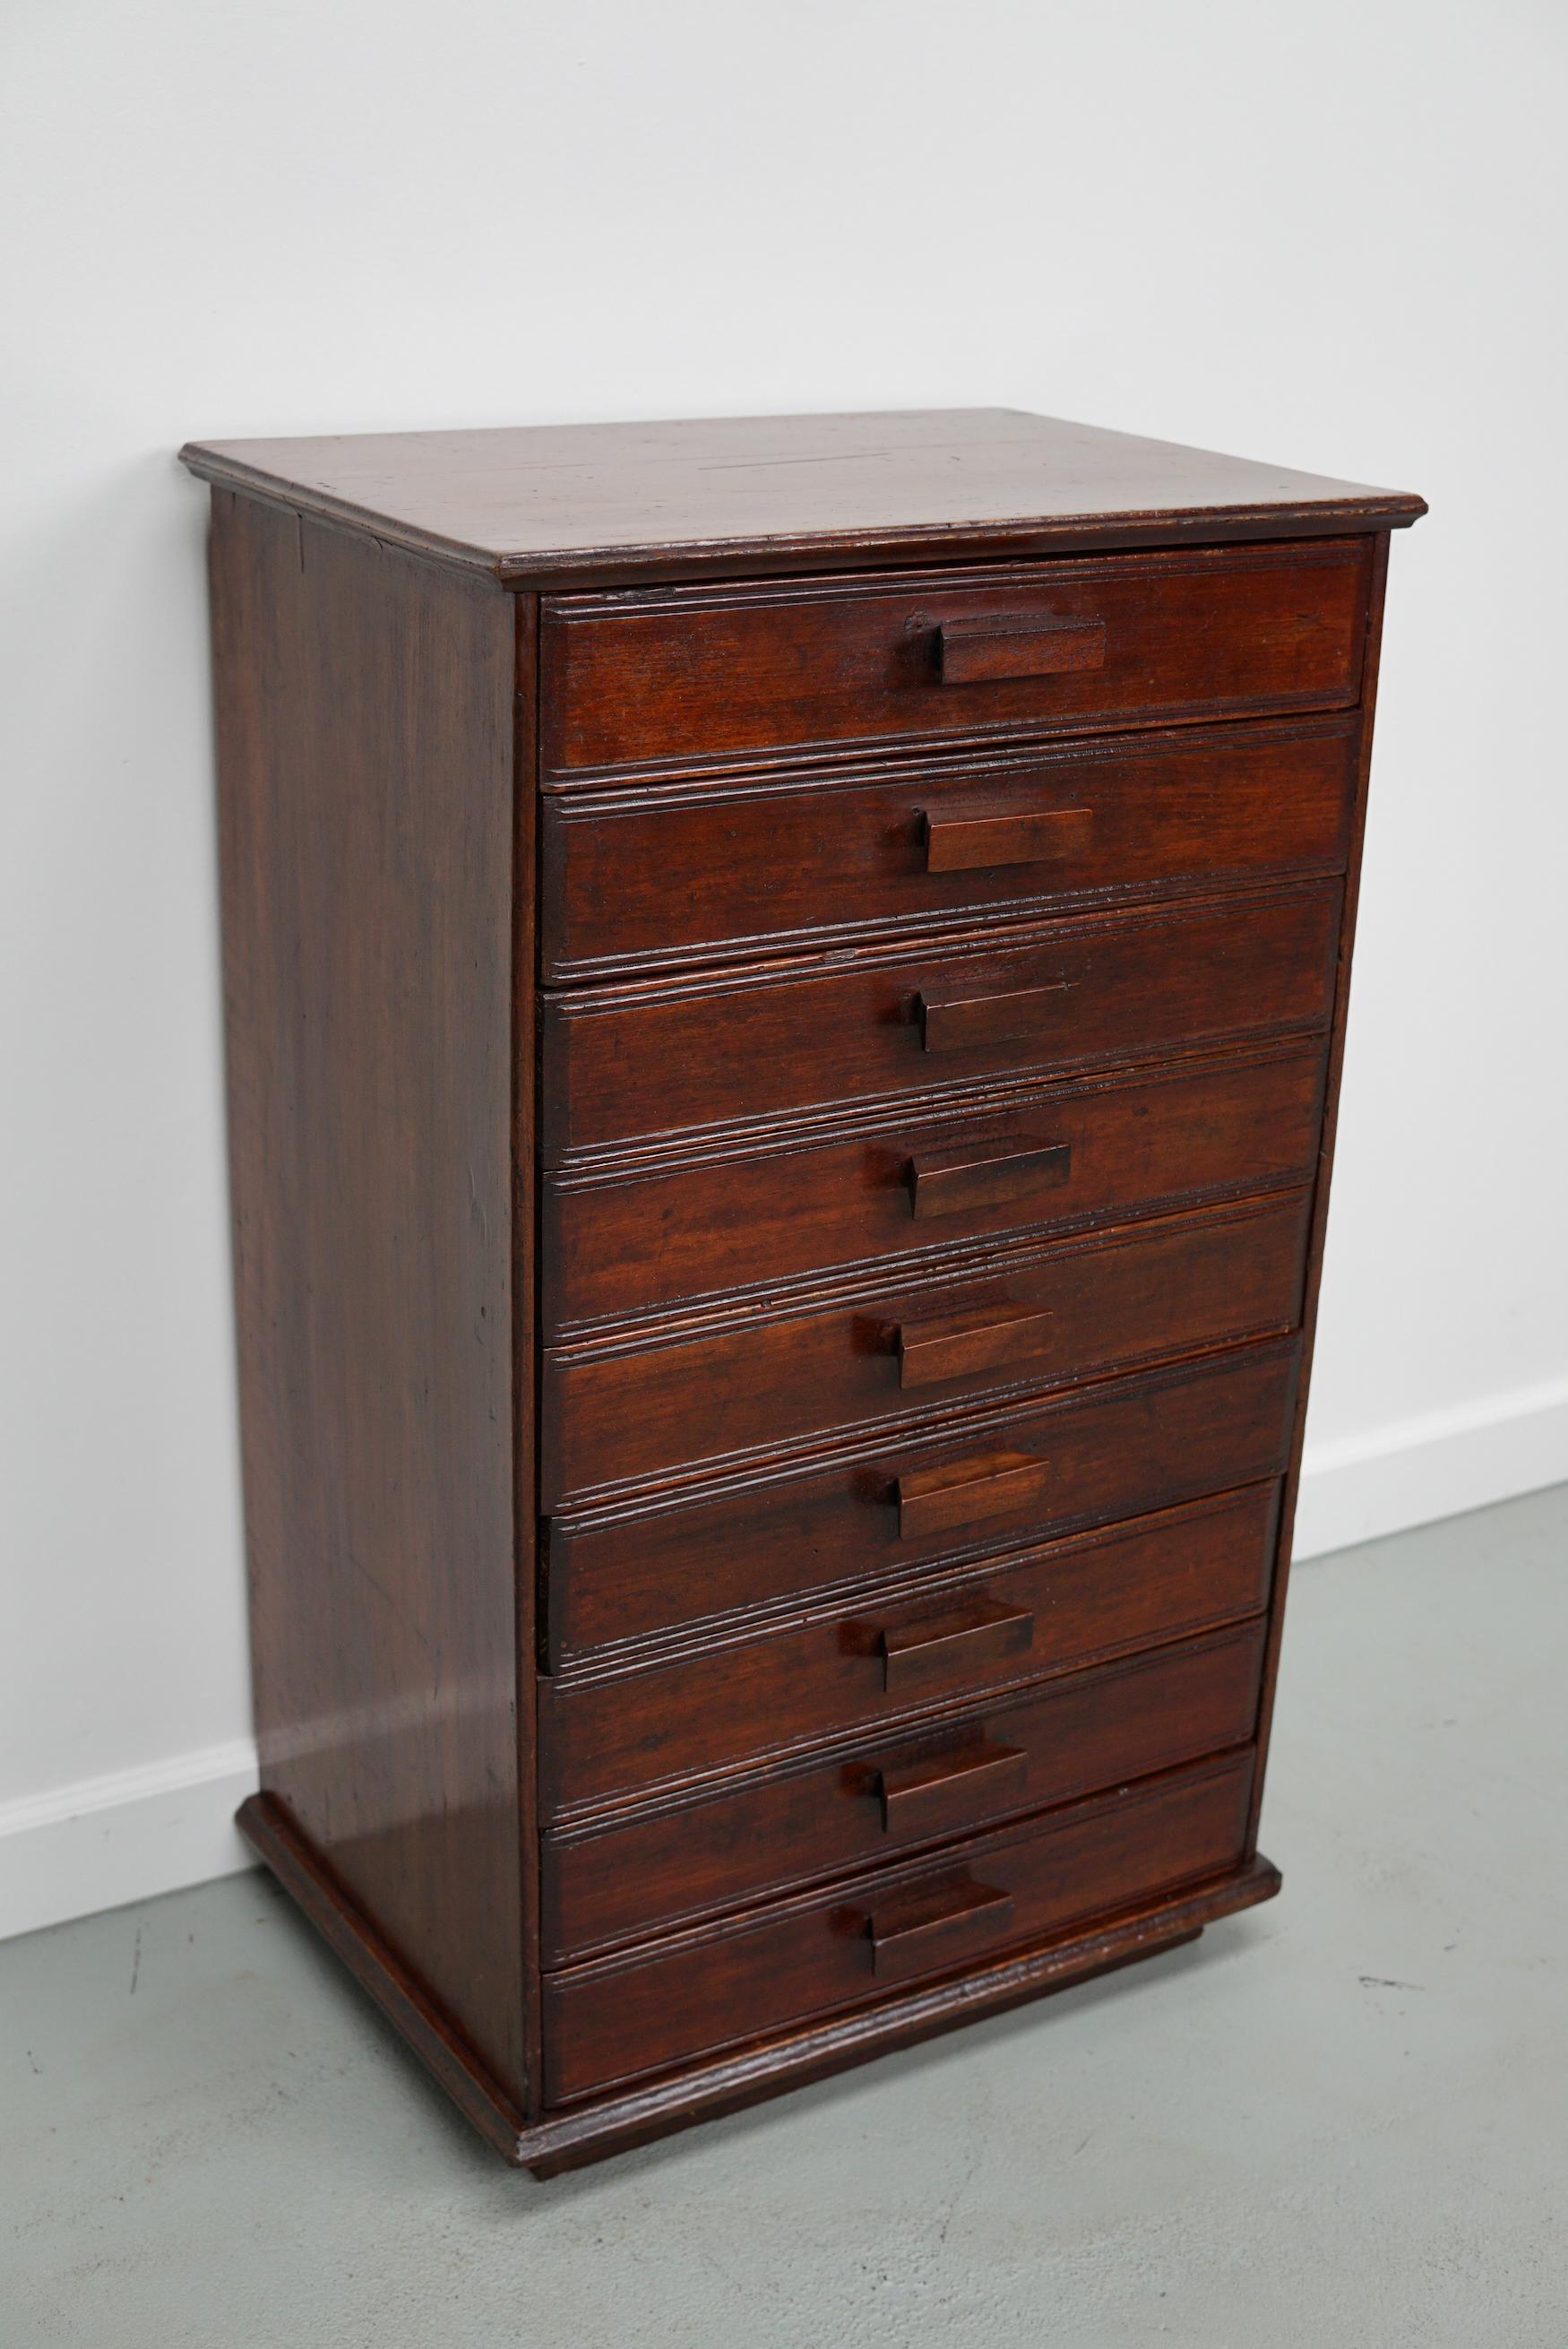 This cabinet was made around 1920 in France and features amazing Art Deco details. It was made from mahogany and features 9 drawers with mahogany handles and a non functional locking system.